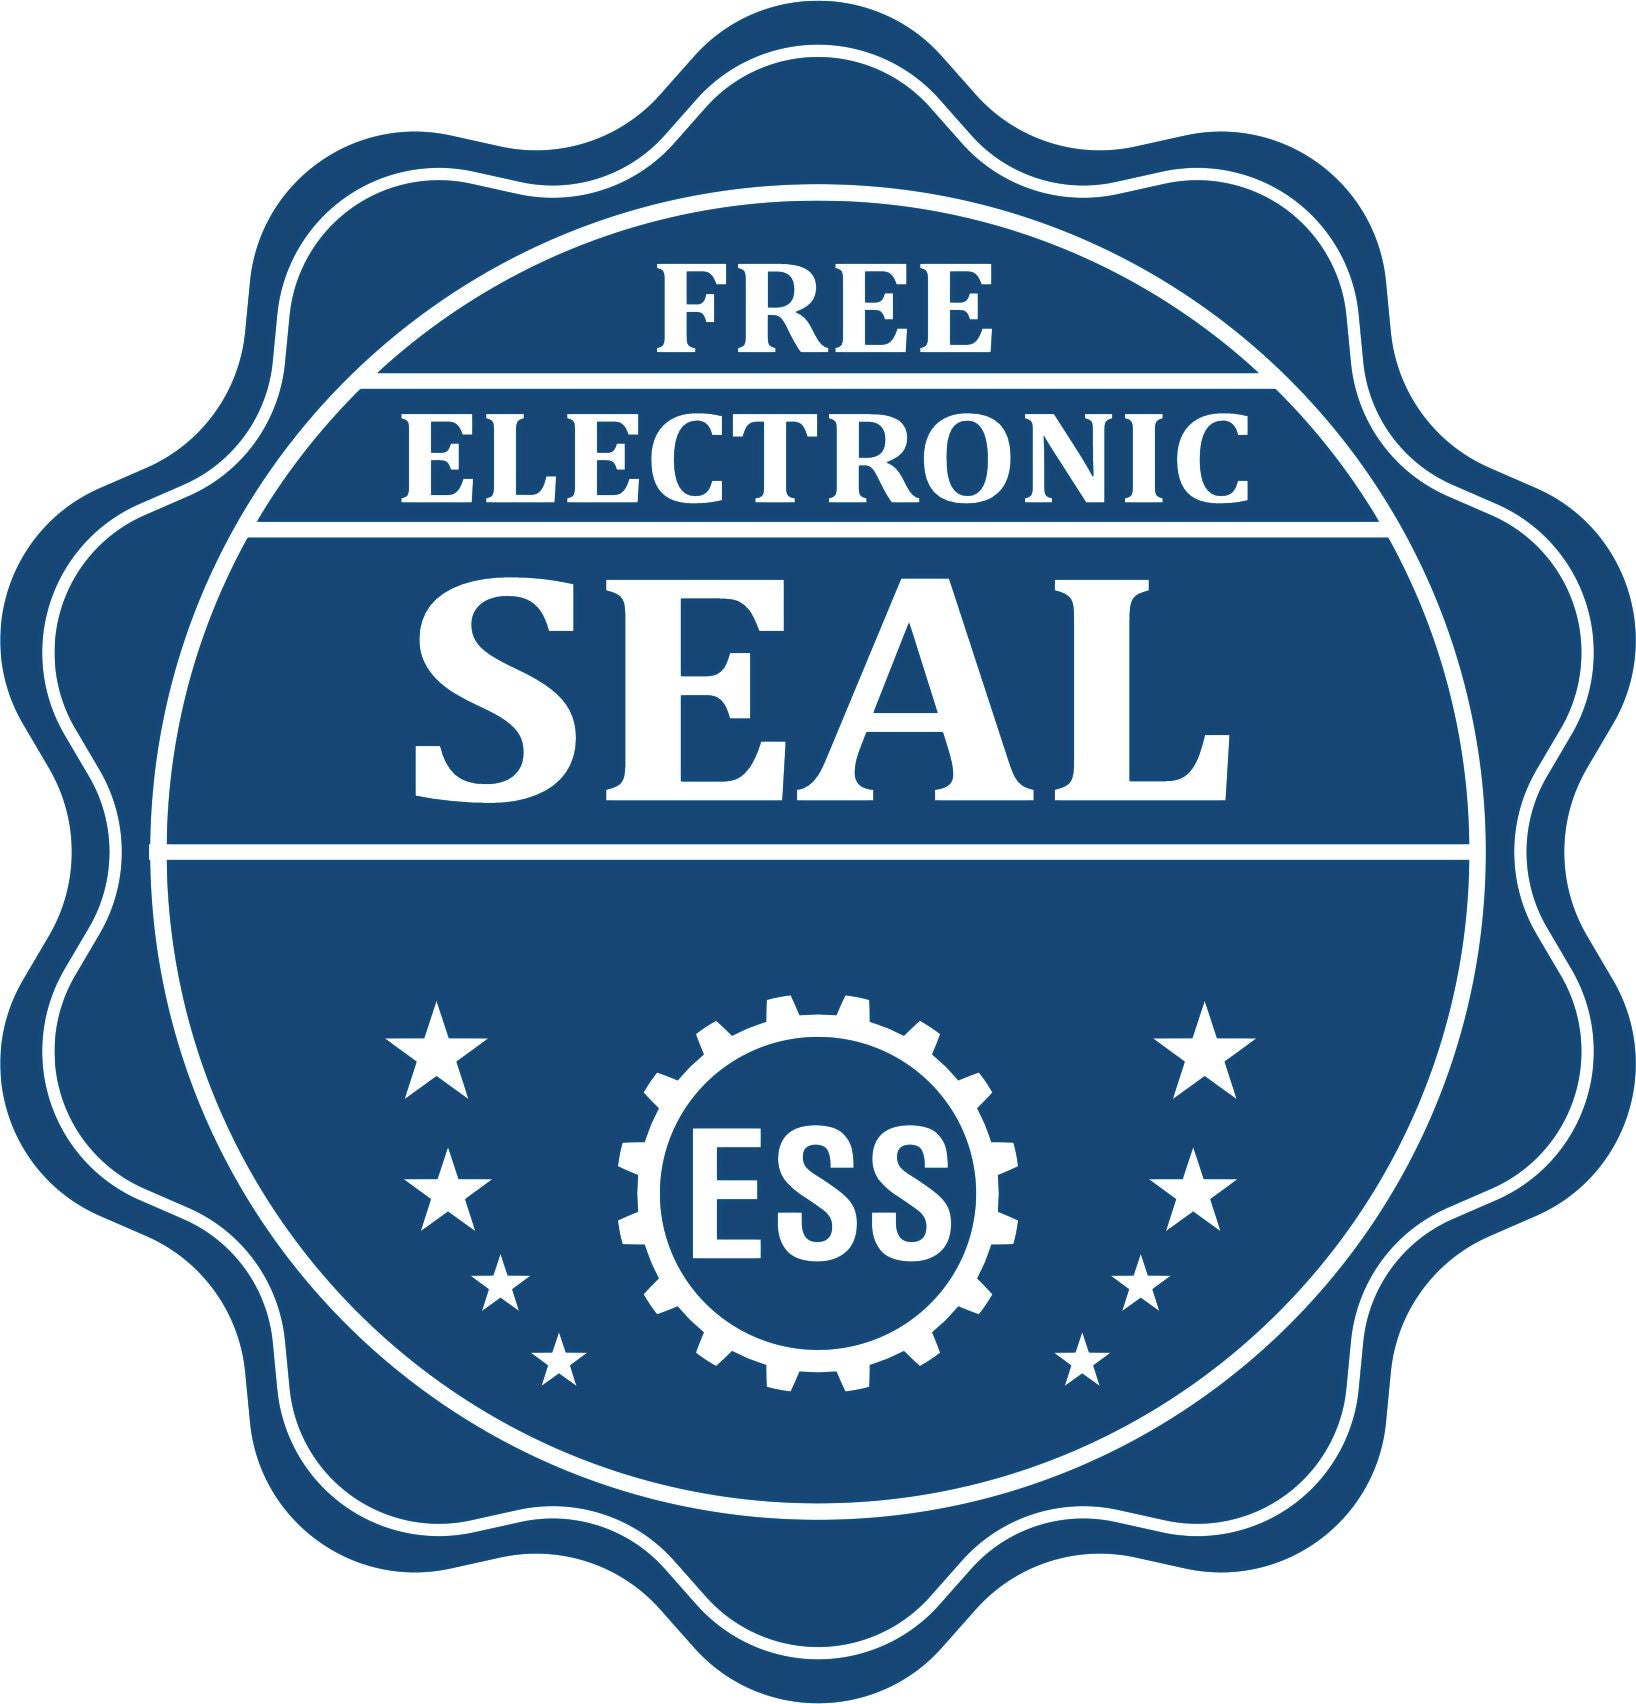 A badge showing a free electronic seal for the Gift Montana Landscape Architect Seal with stars and the ESS gear on the emblem.